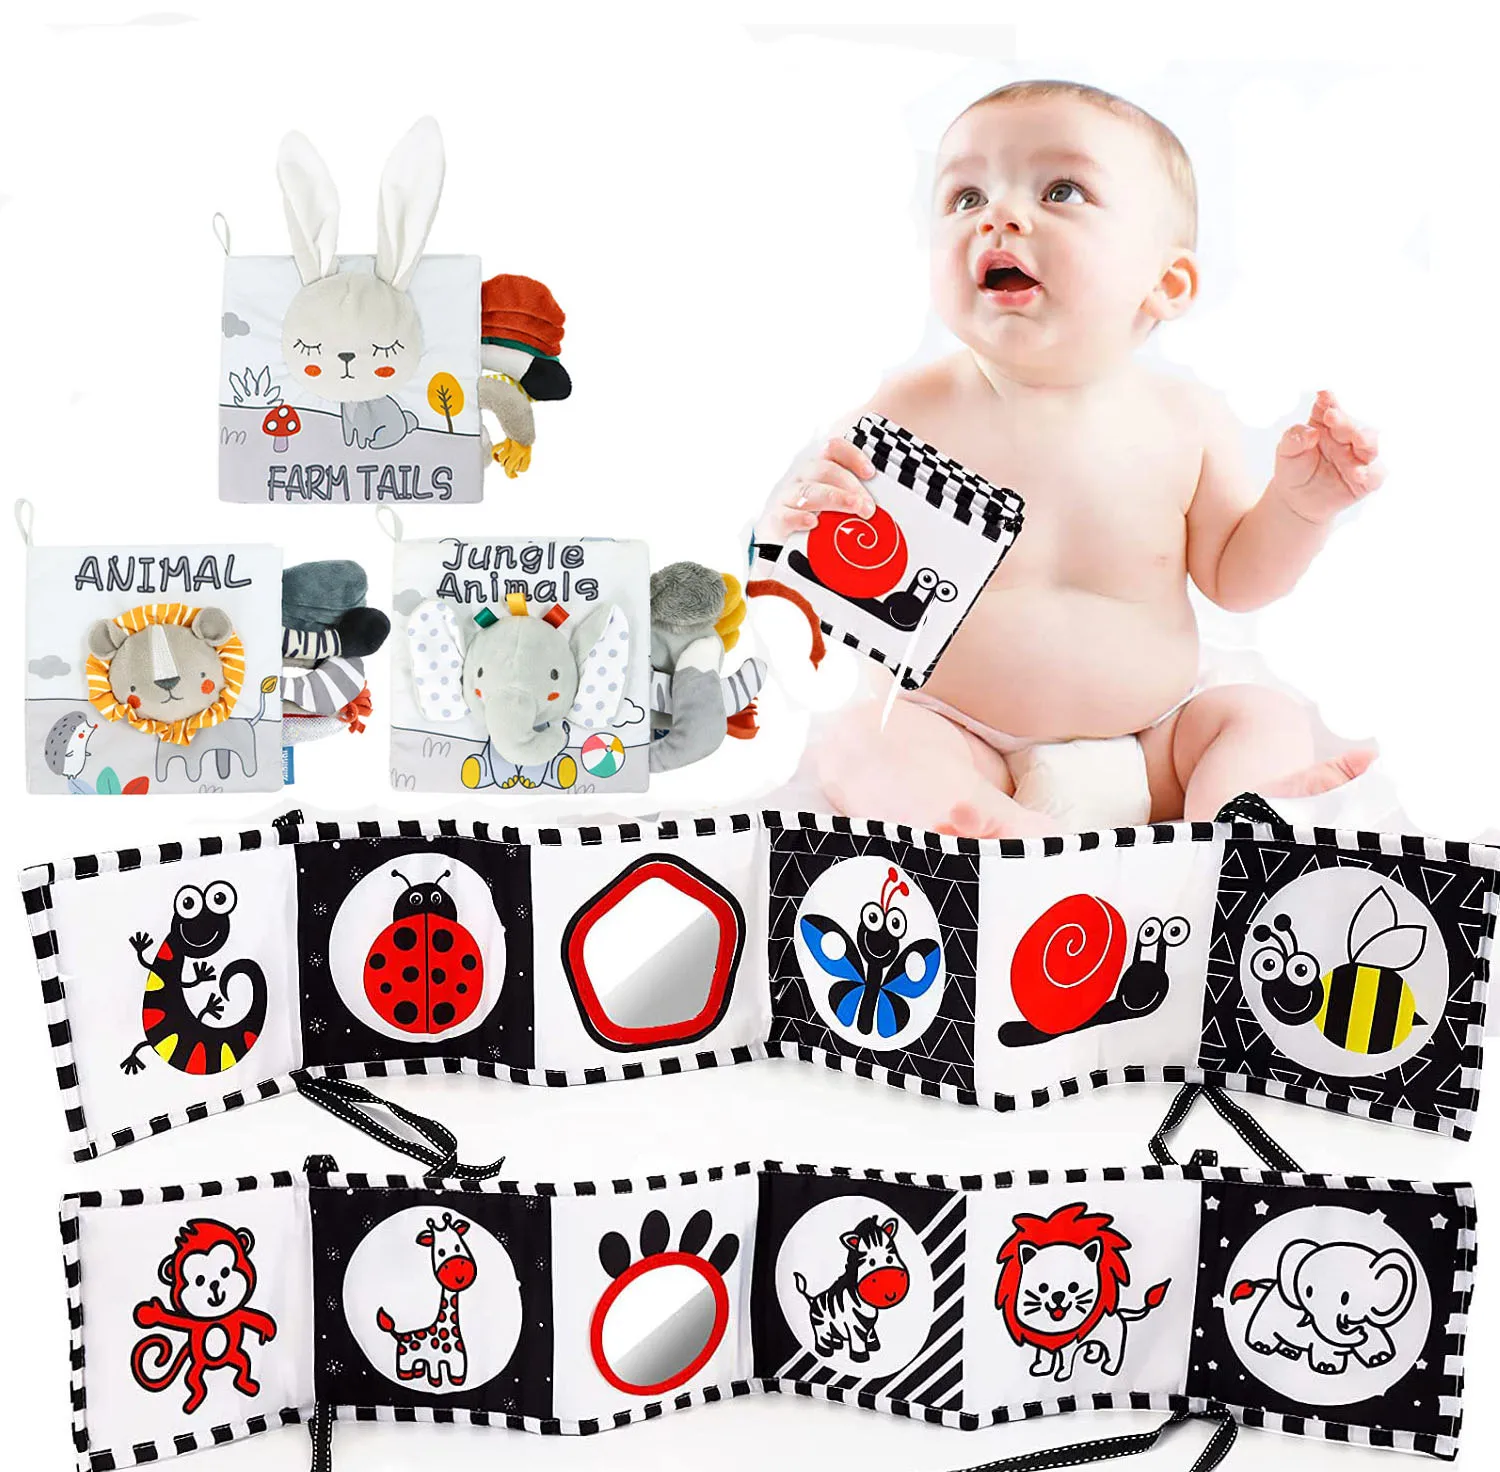 

Black and White High Contrast Soft Book for Baby Educational Toys Activity Bed Cloth Book Crib Toys for Newborn 0 12 Months